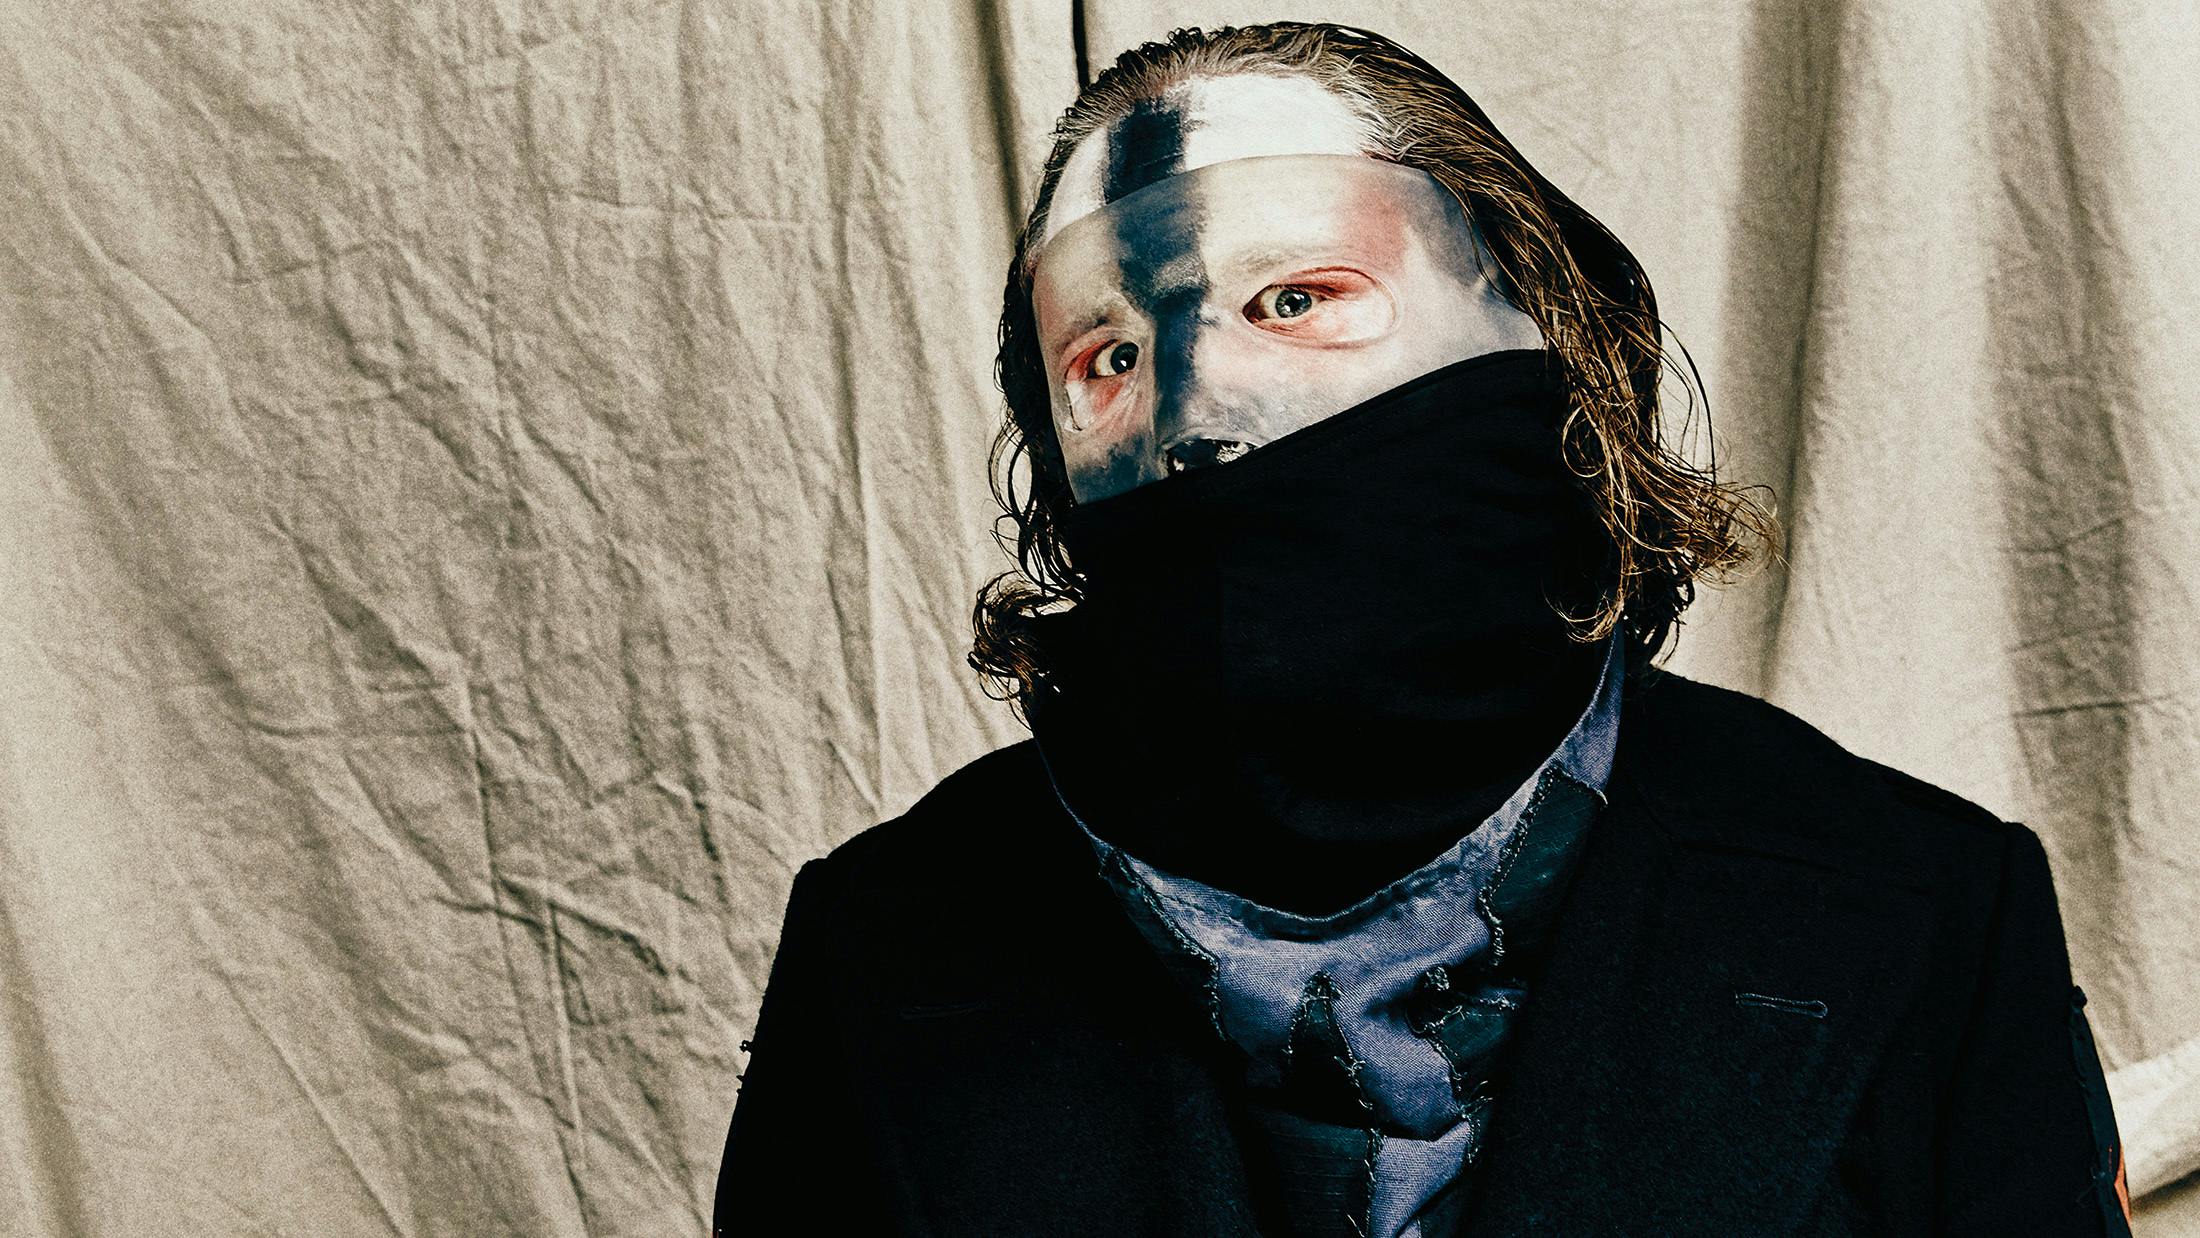 Corey Taylor: "Stop Whining And Put Your God Damn Mask On"